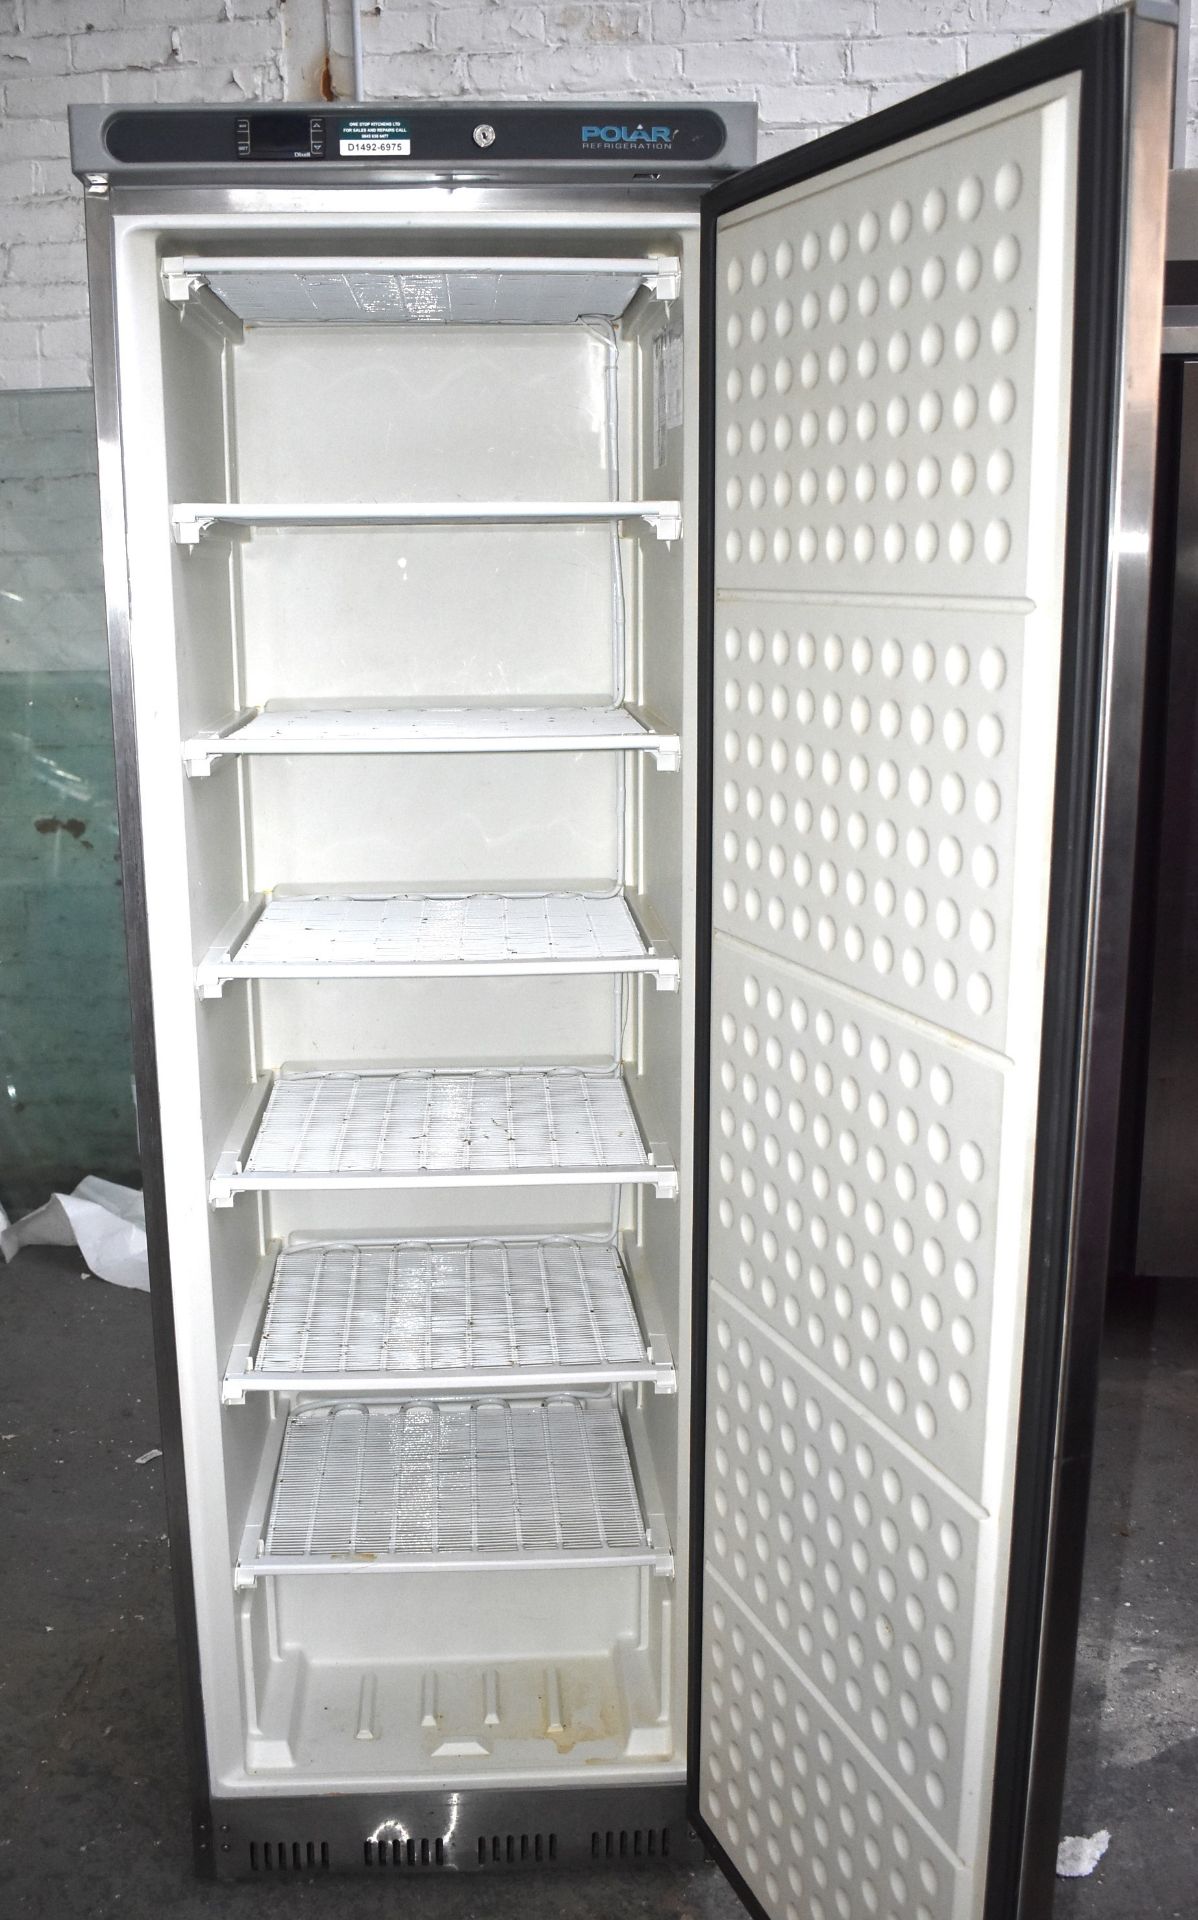 1 x Polar C-Series Commercial Upright Freezer With Stainless Steel Finish - 365Ltr Capacity - Image 7 of 7